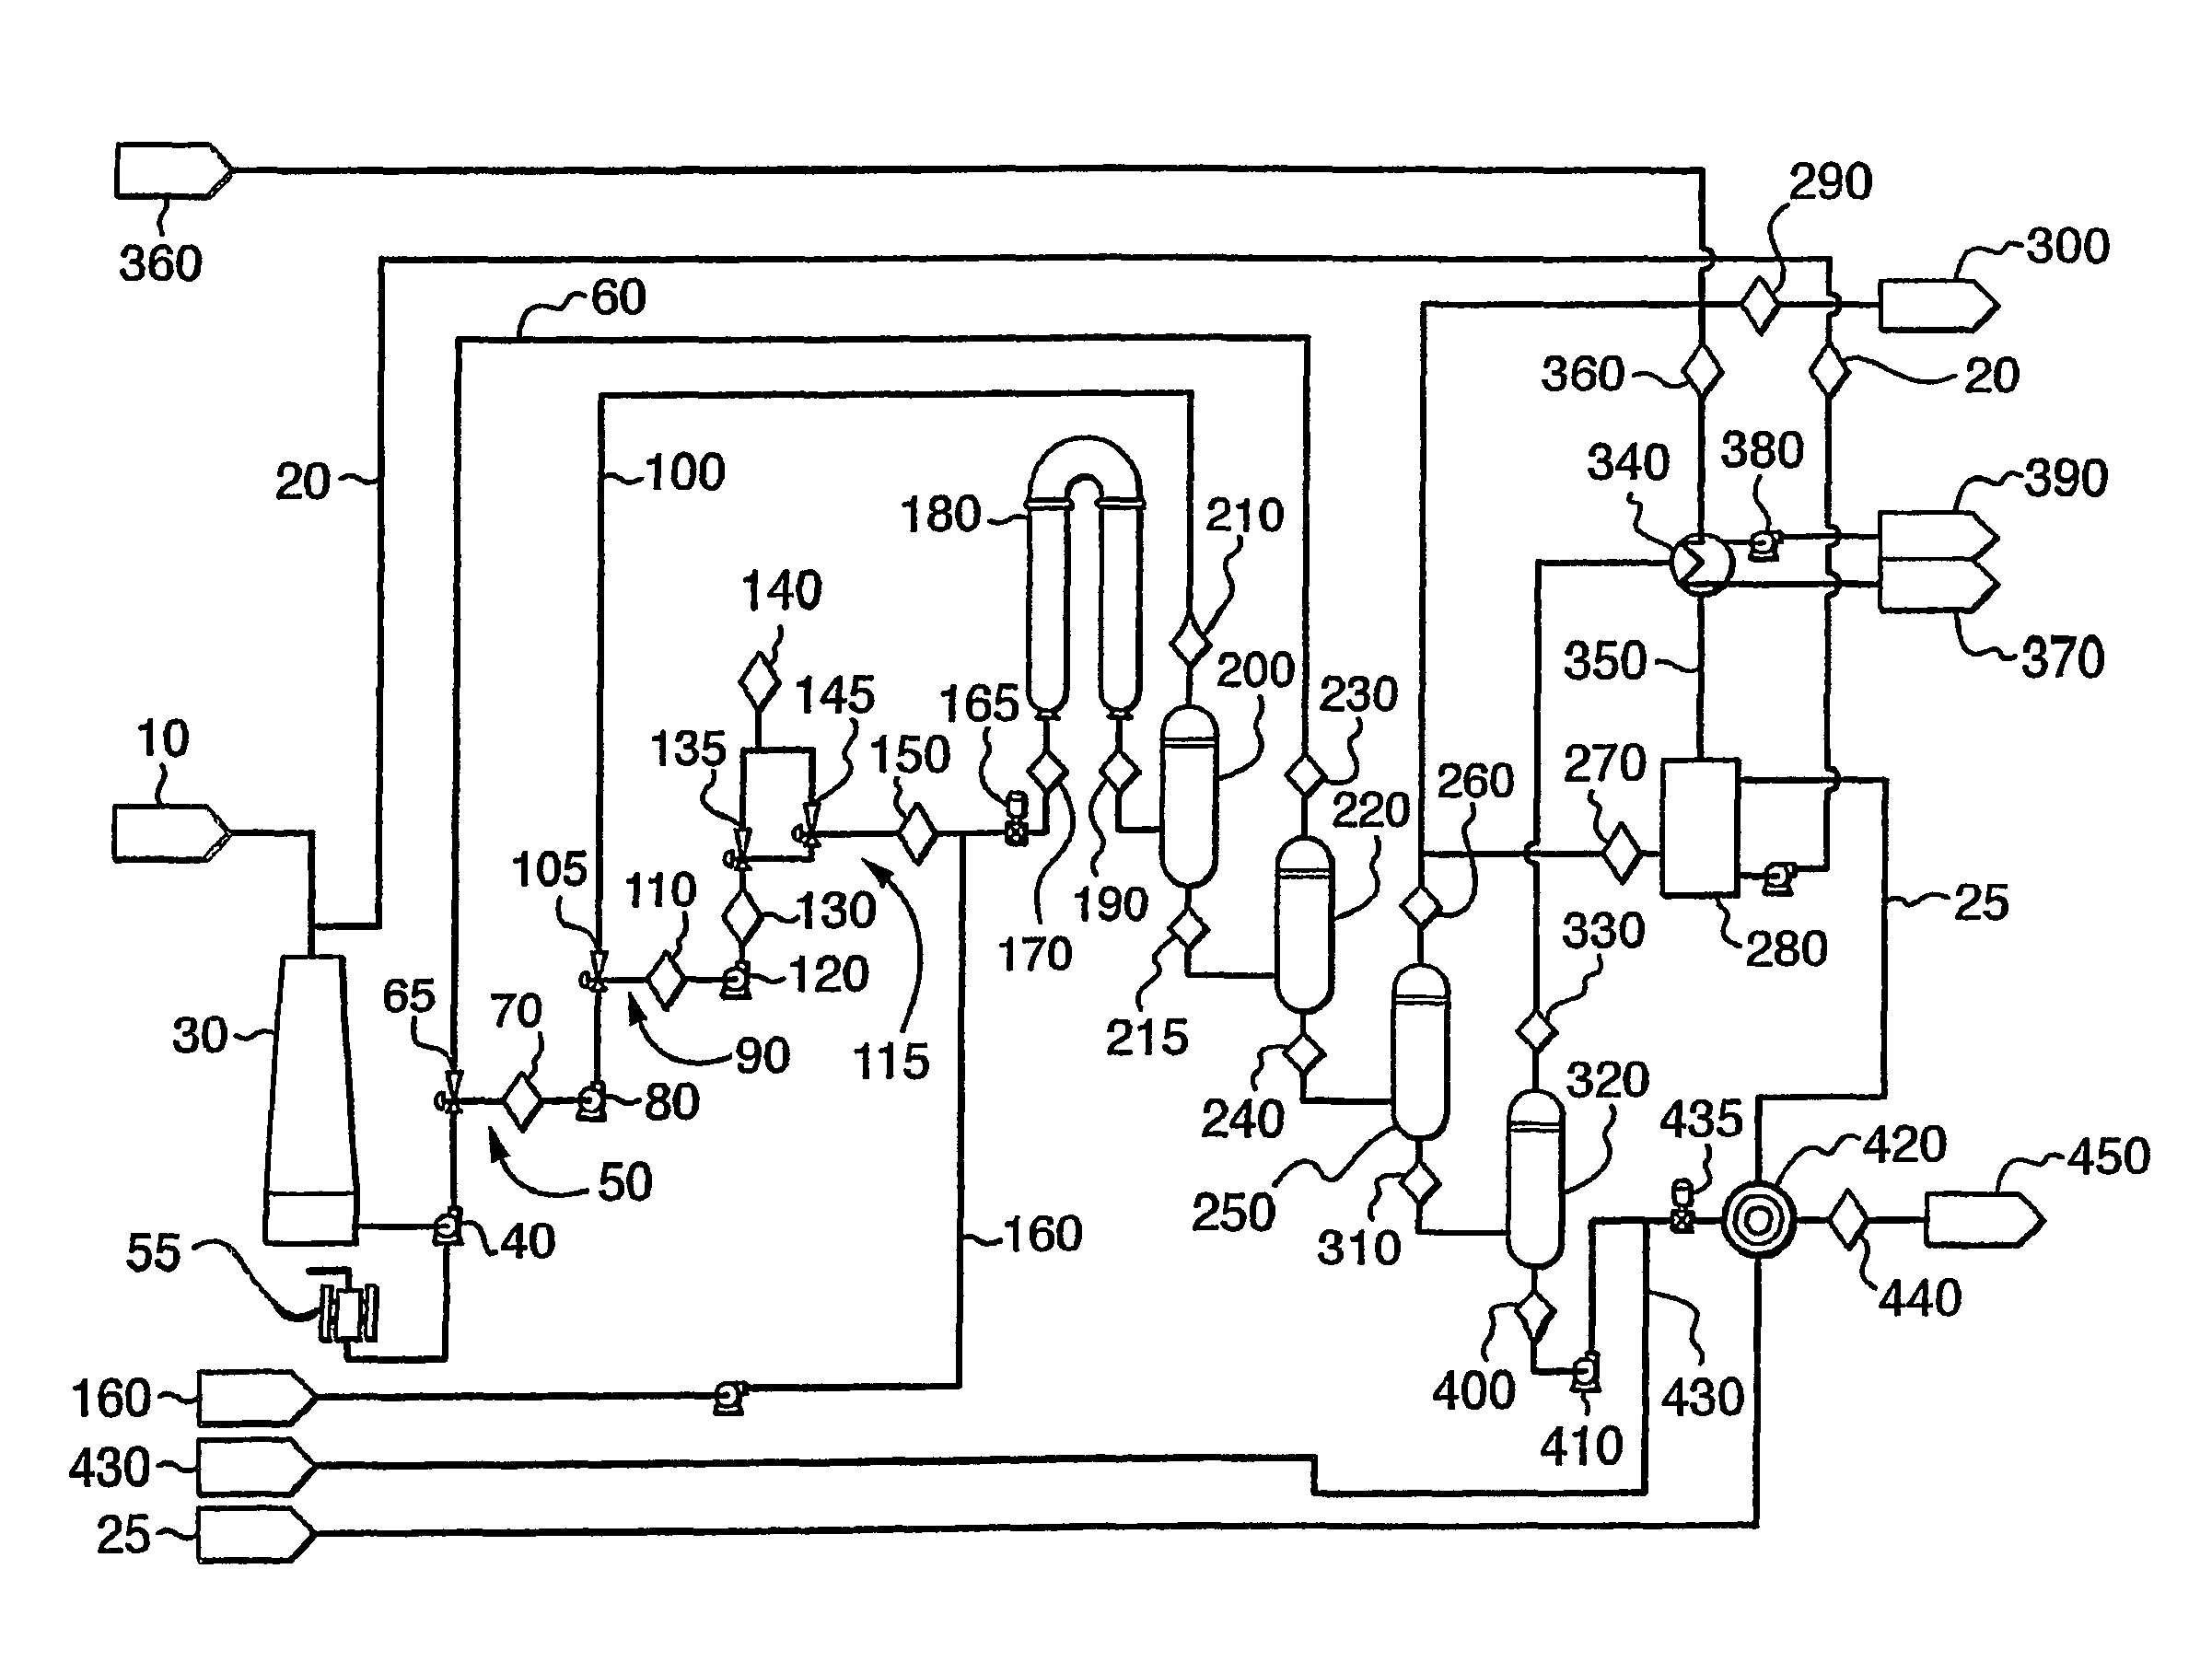 Continuous flowing pre-treatment system with steam recovery